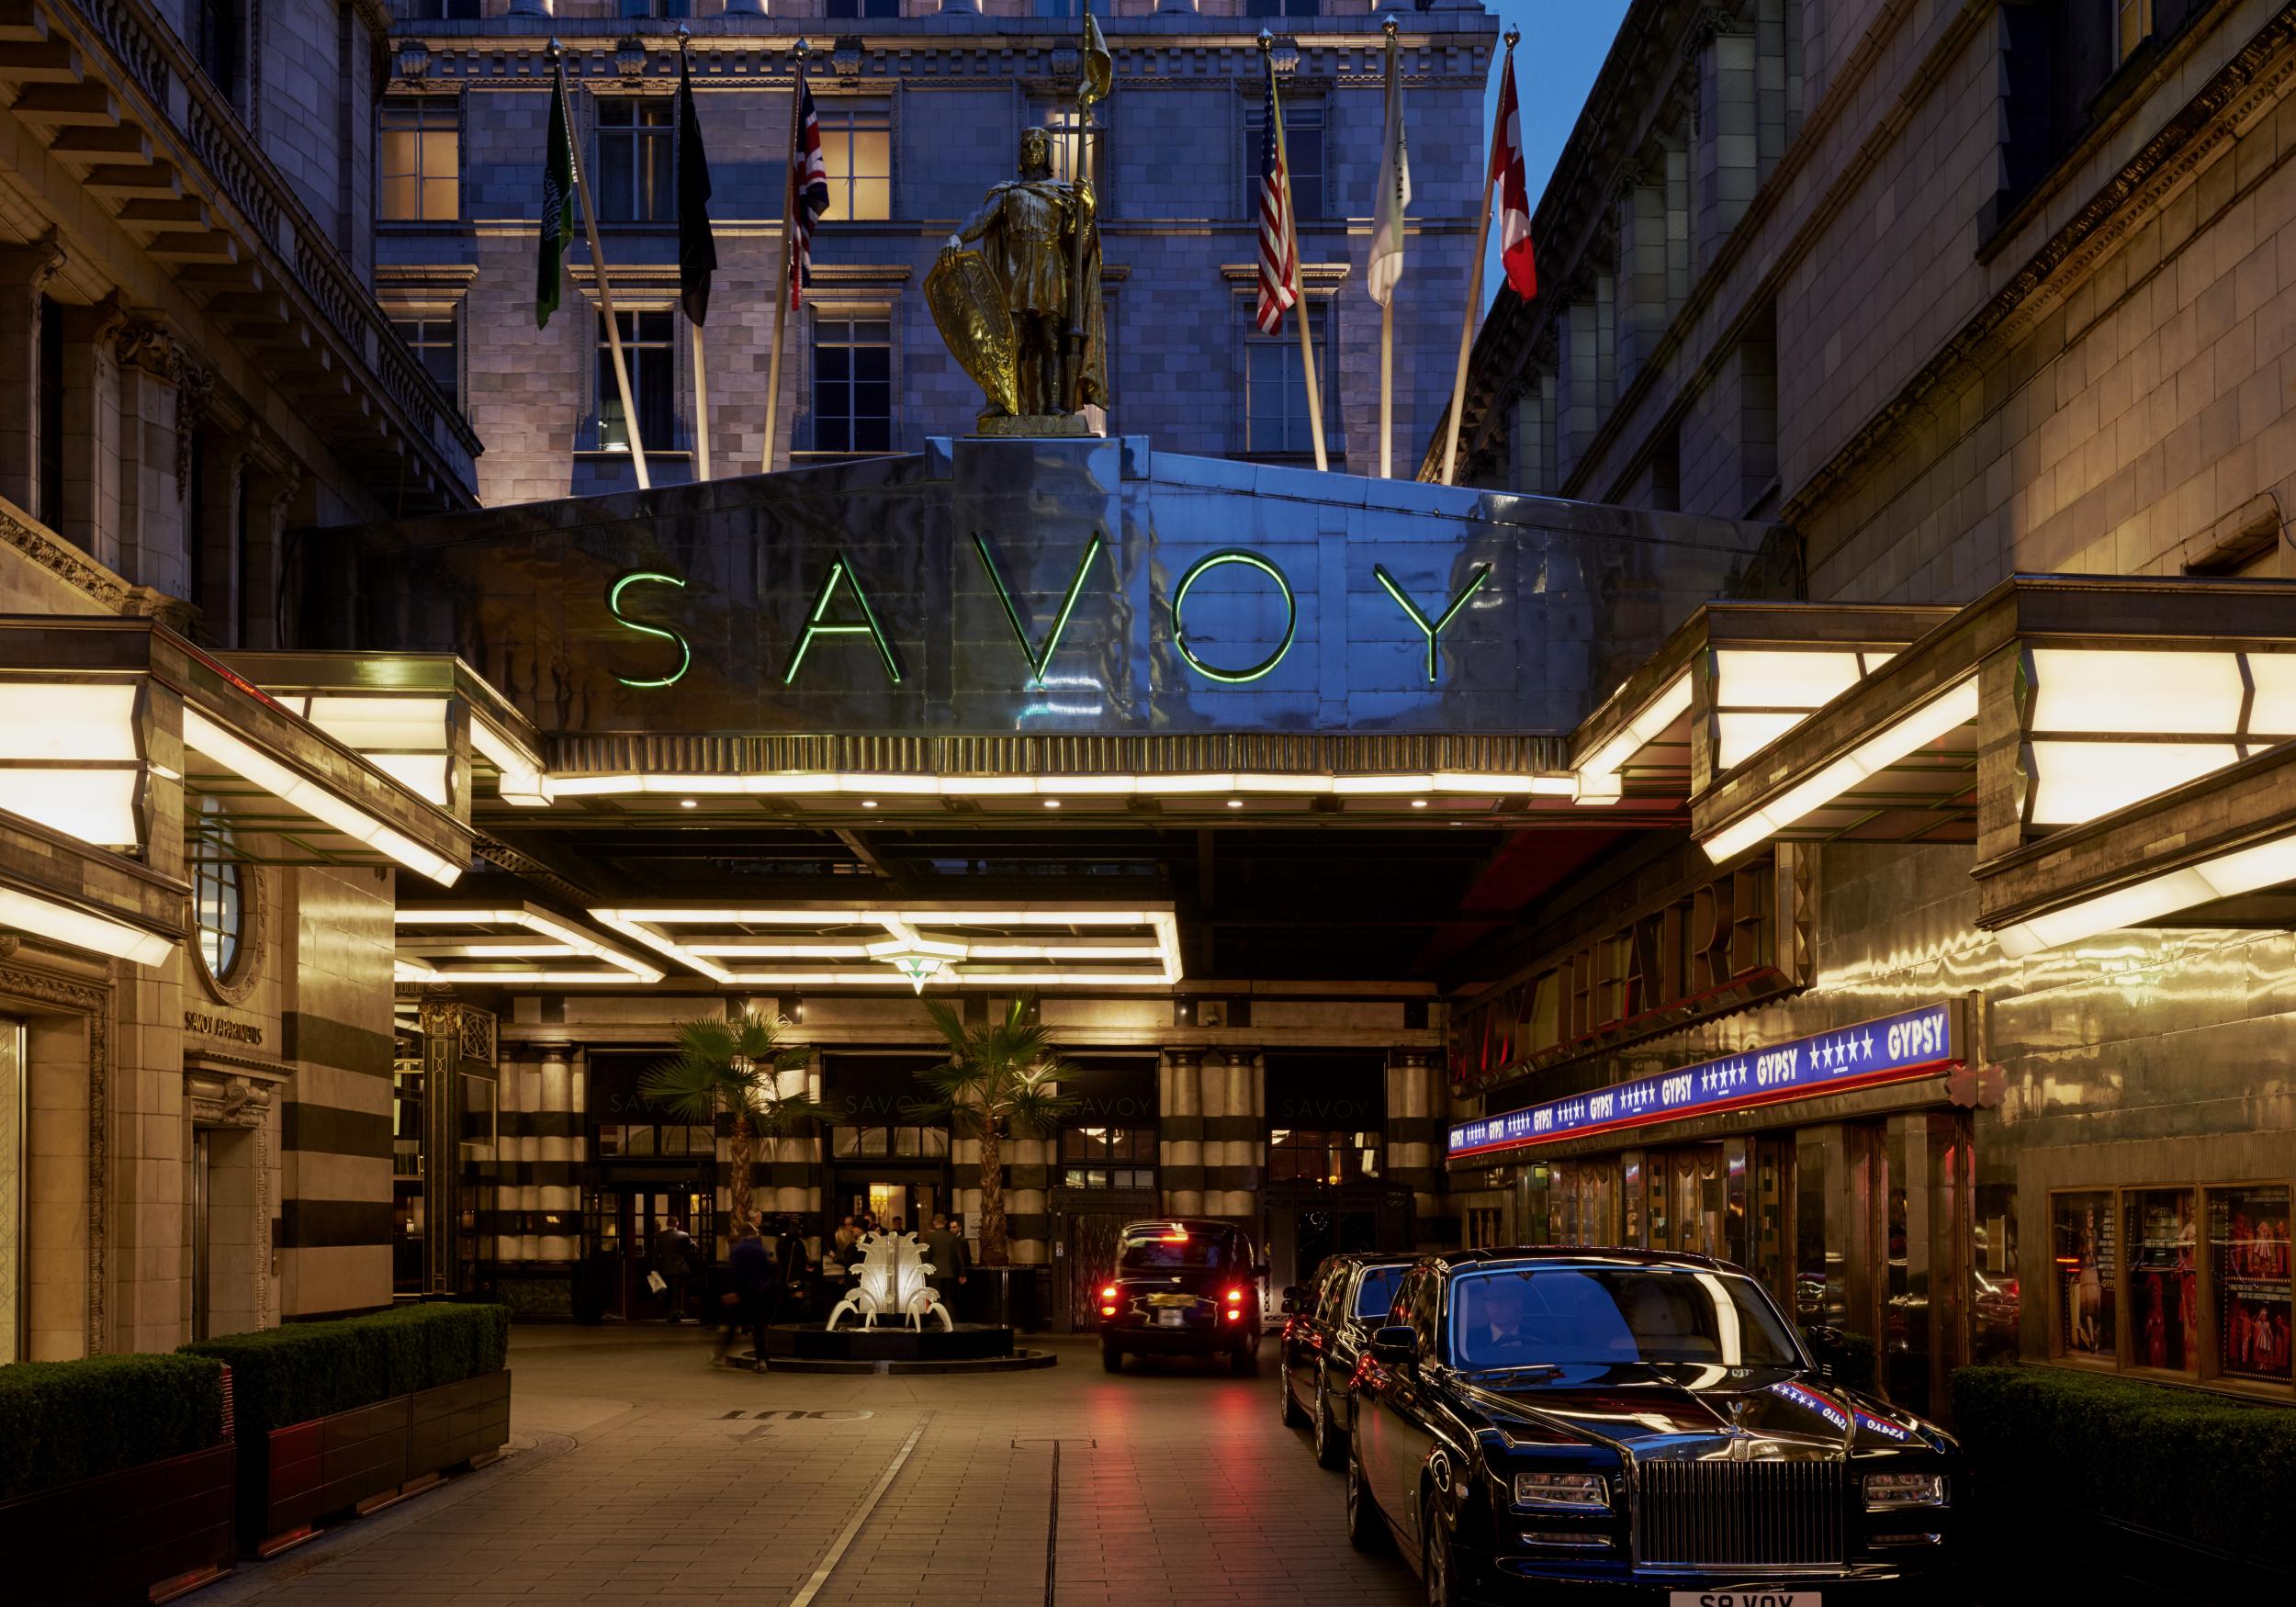 The Savoy's entrance driveway is the only place in the UK where you drive on the right